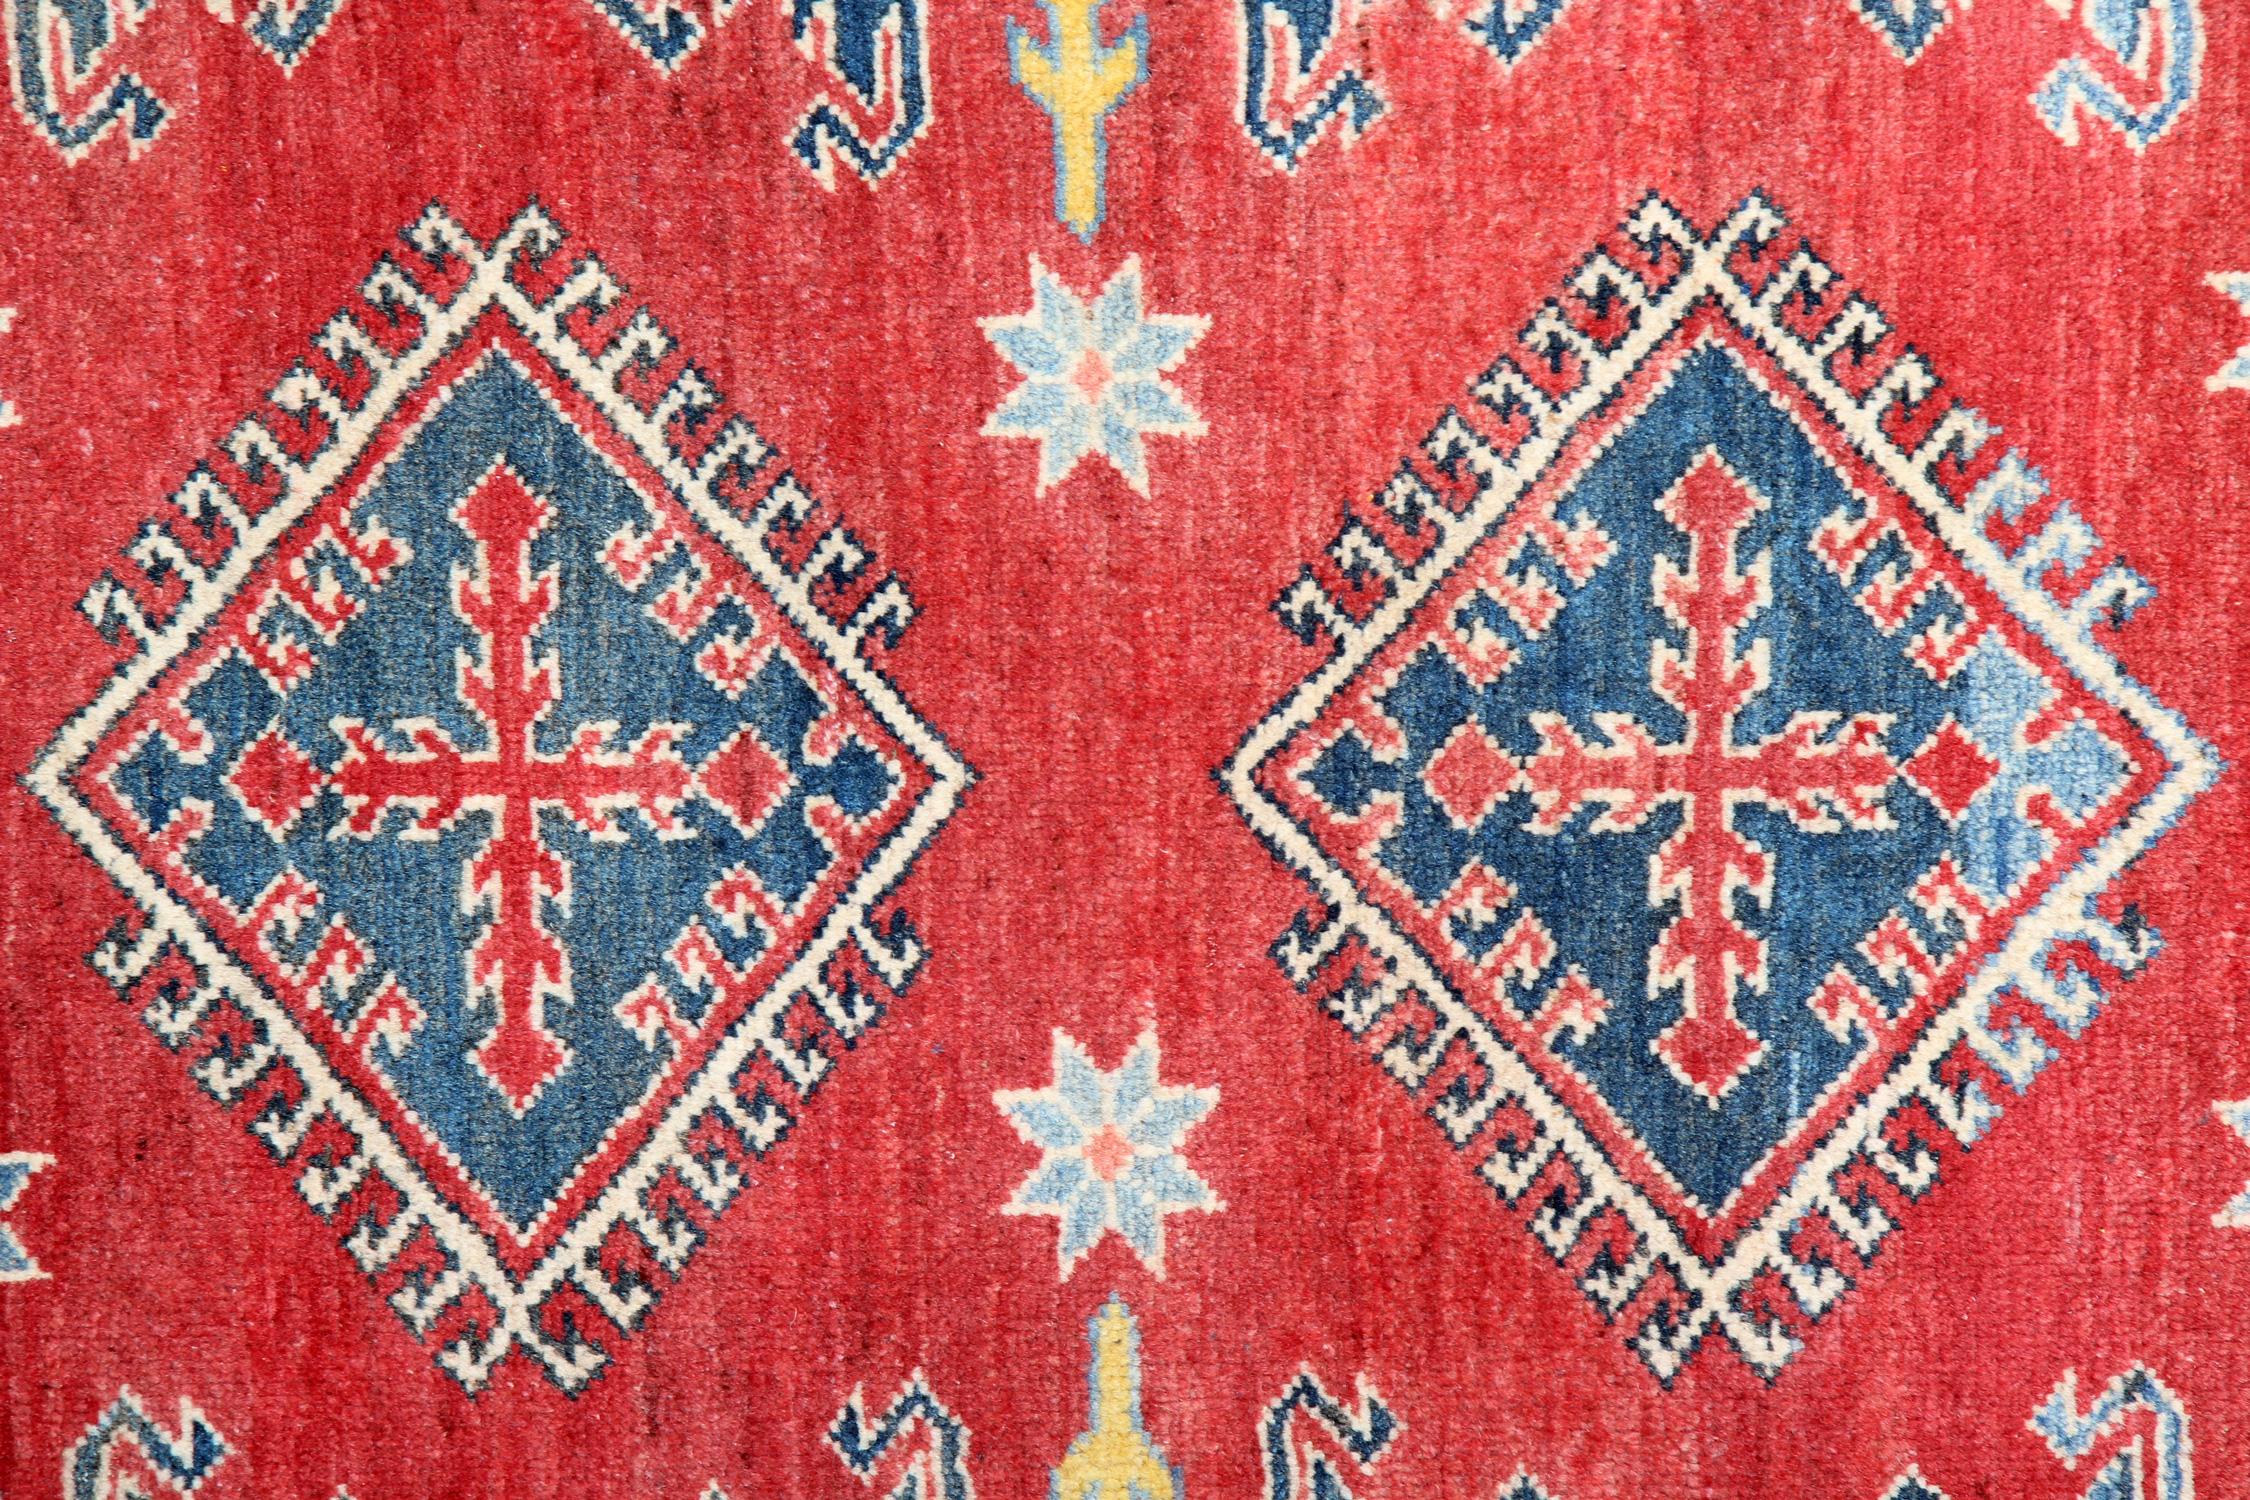 Kazak Small Oriental Rugs Red Geometric Rugs, Handmade Carpet for Sale For Sale